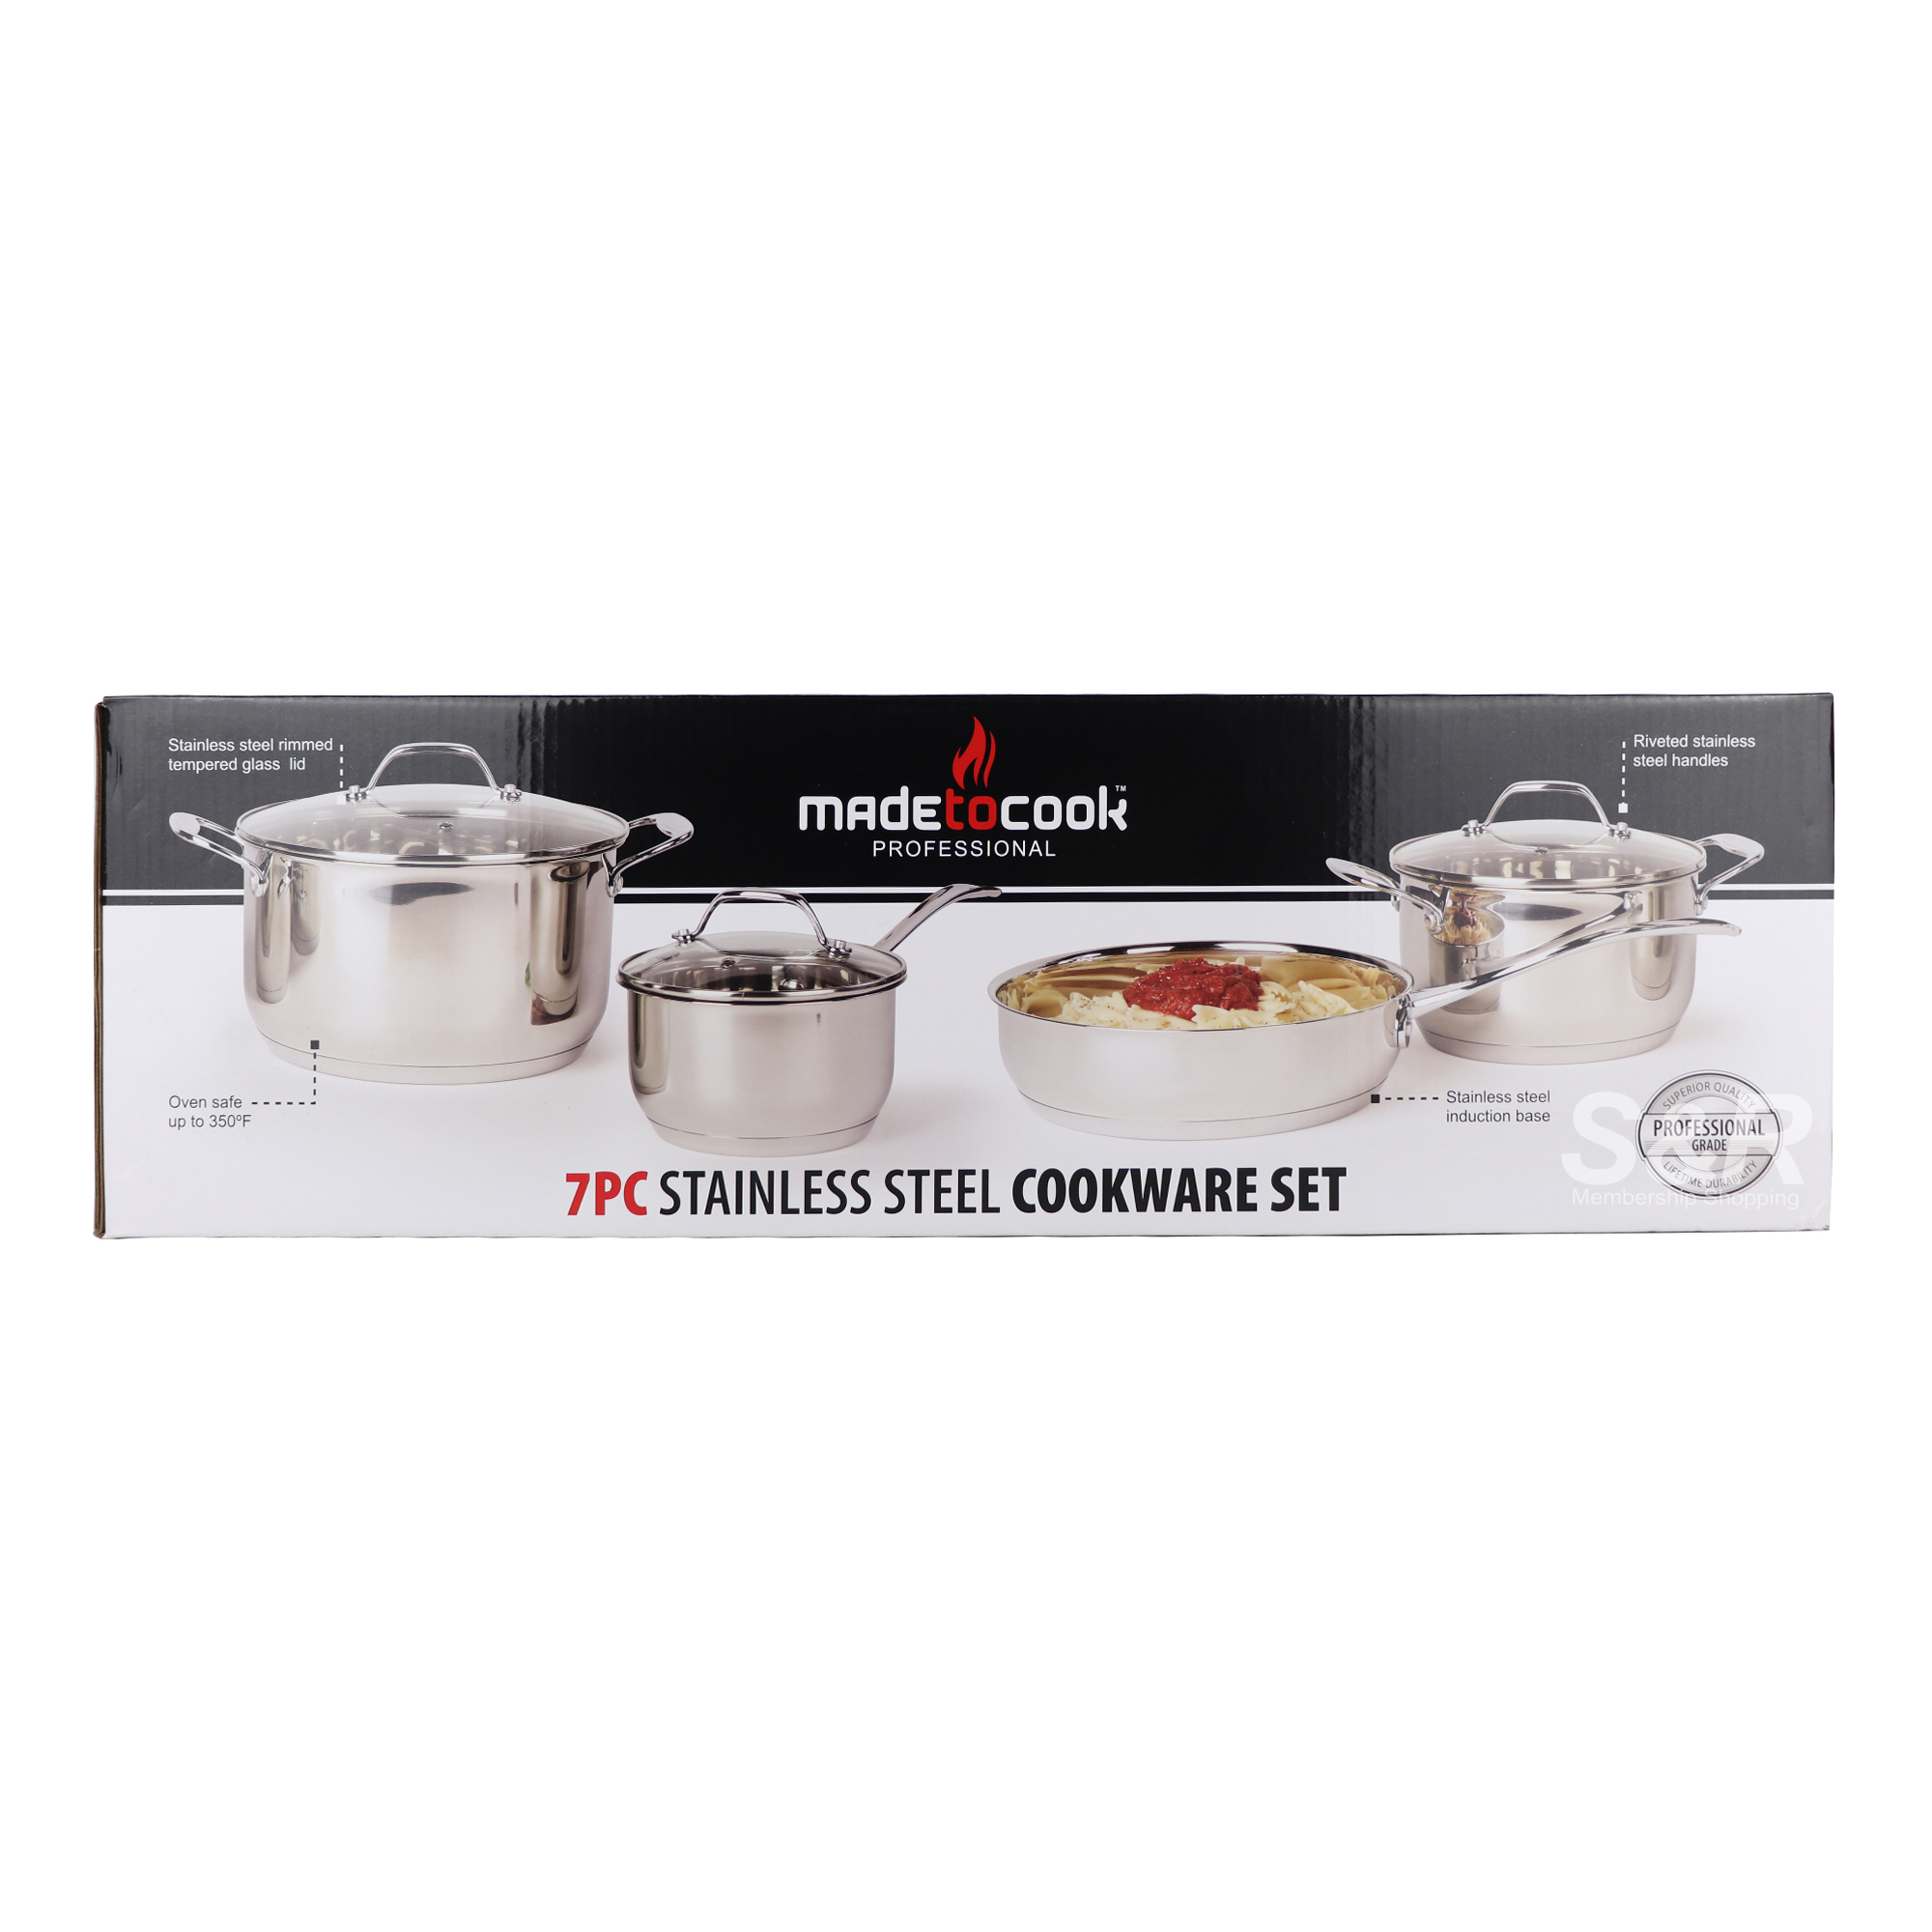 Made To Cook 7pc Stainless Steel Cookware Set